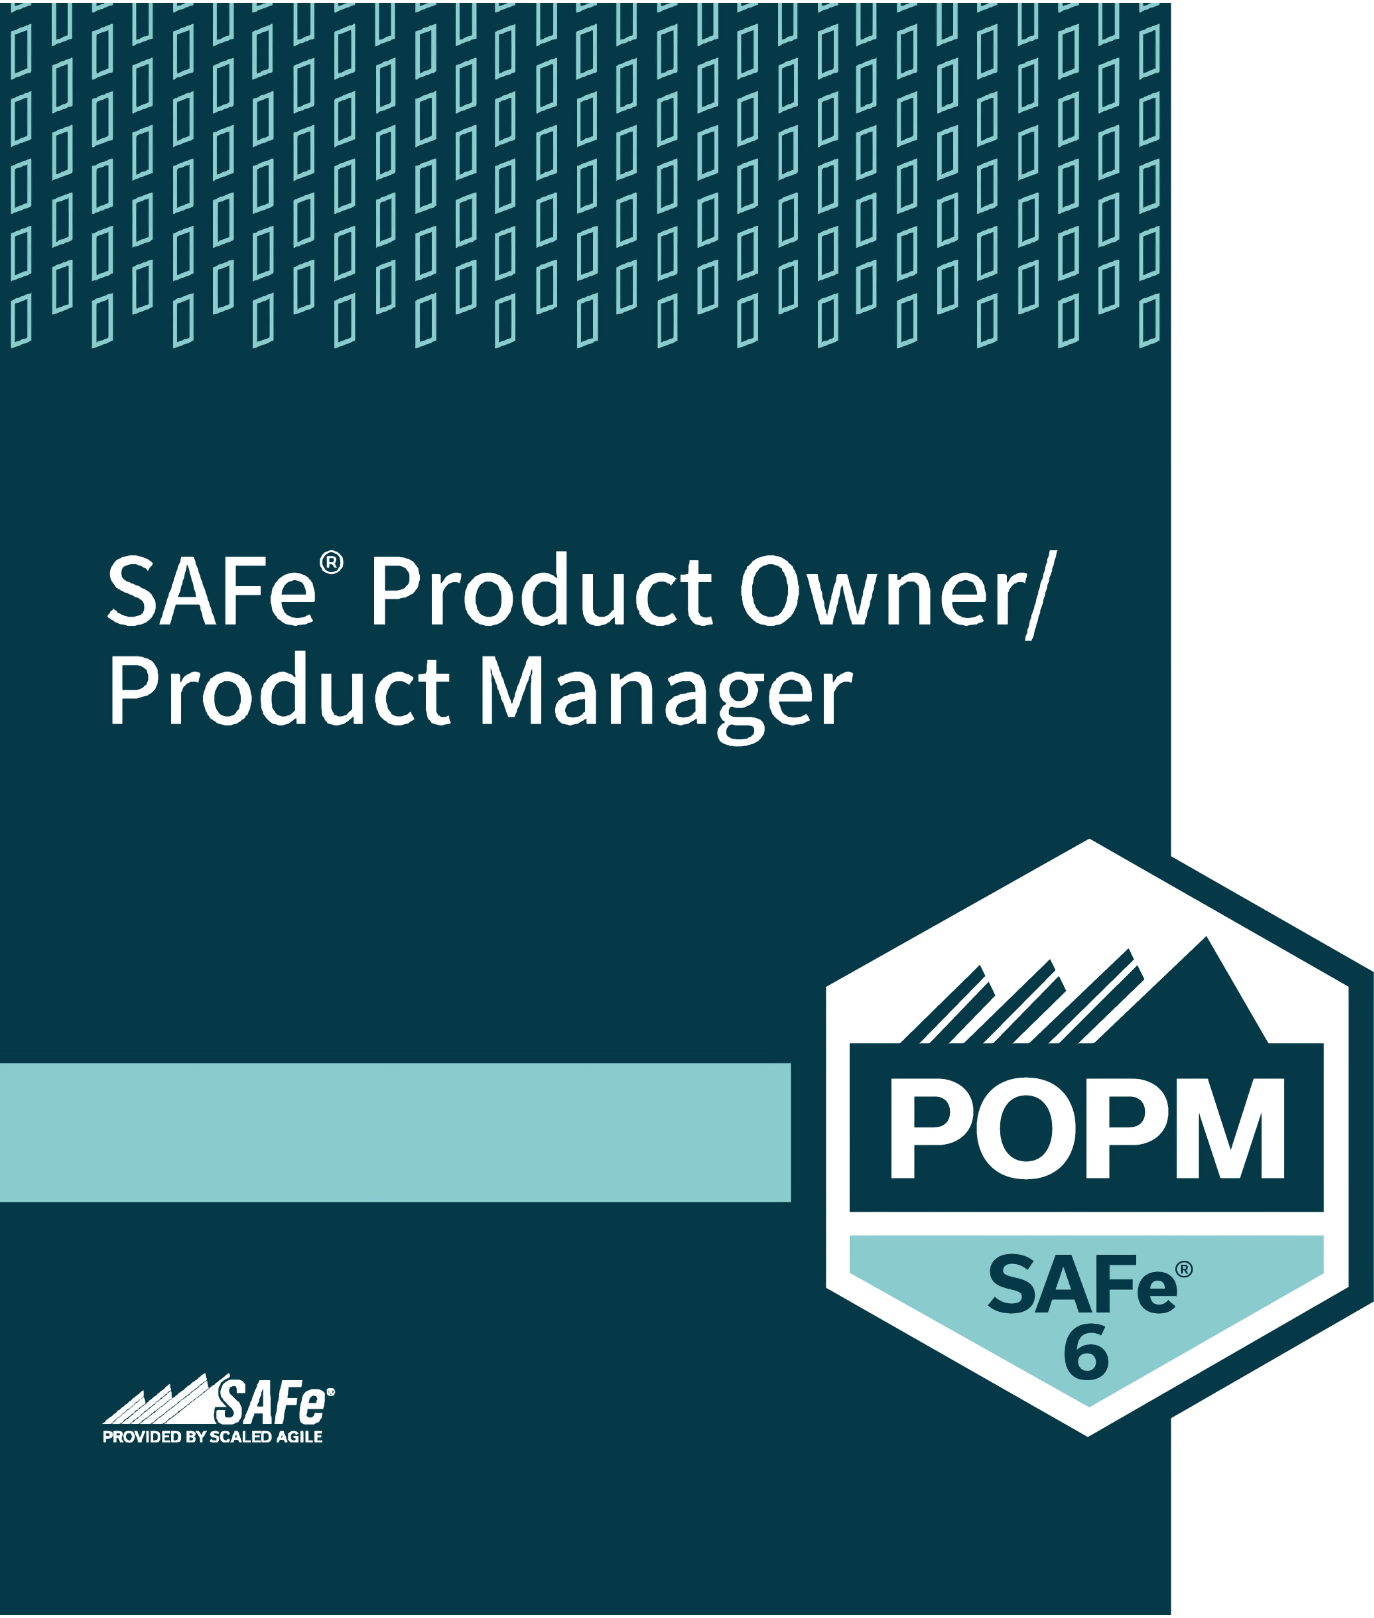 SAFe® Product Owner/Product Manager
